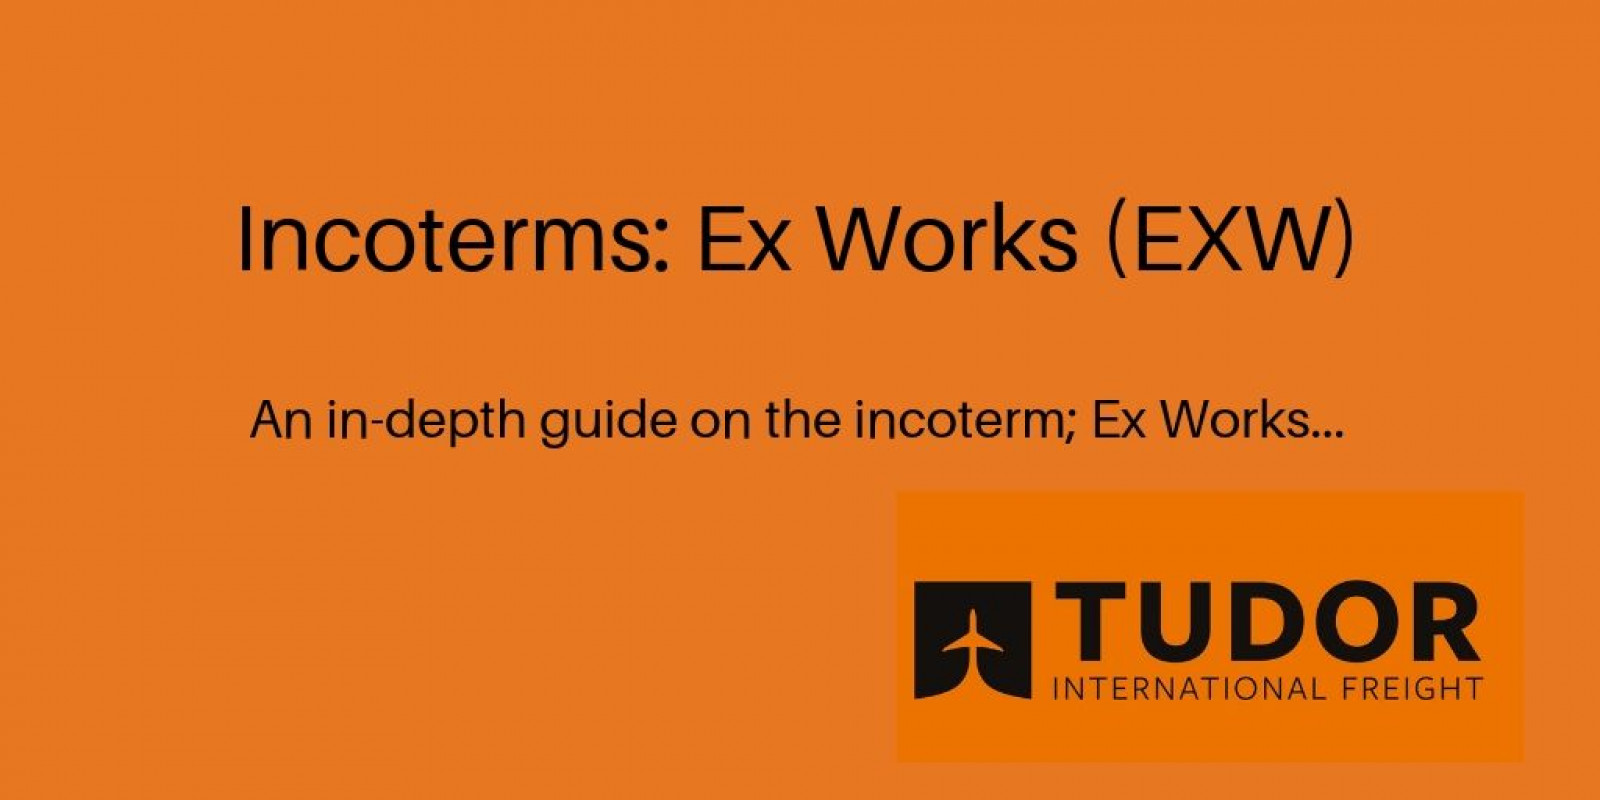 Incoterms: Ex Works (EXW)